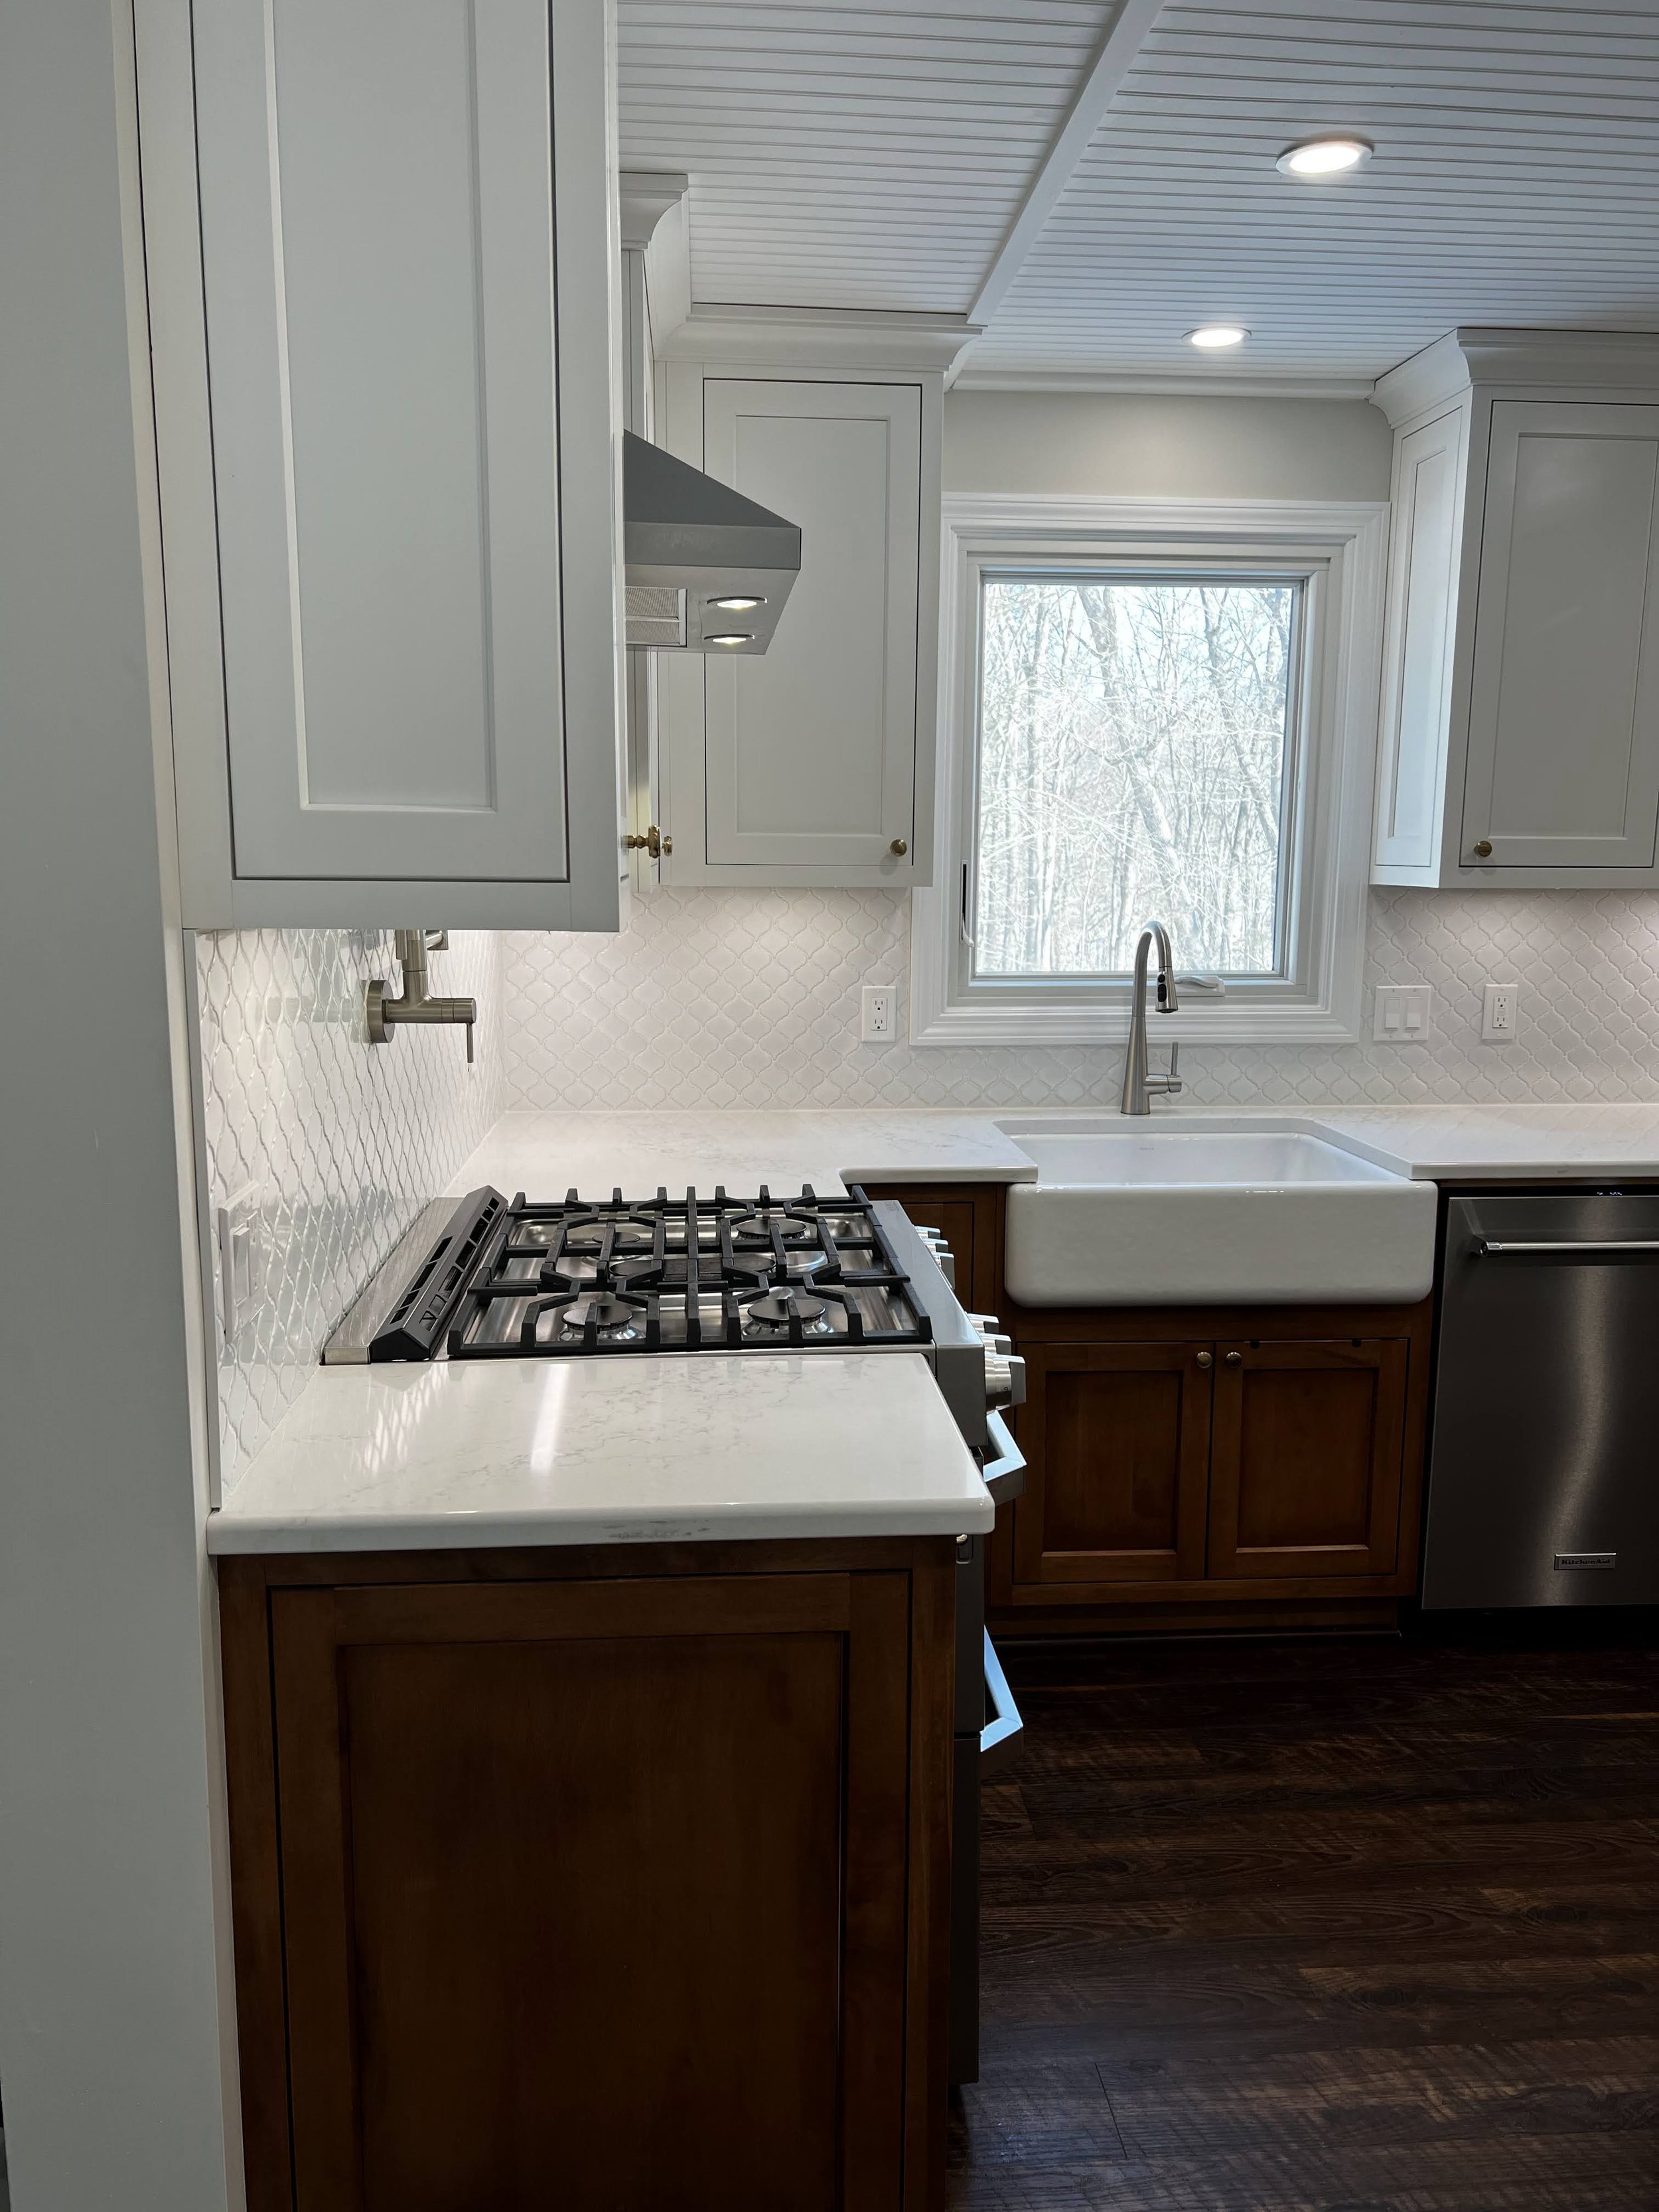 Shaw Remodeling - kitchen design renovations in Niantic East Lyme Old Lyme CT before and after photos makeover (16).jpg